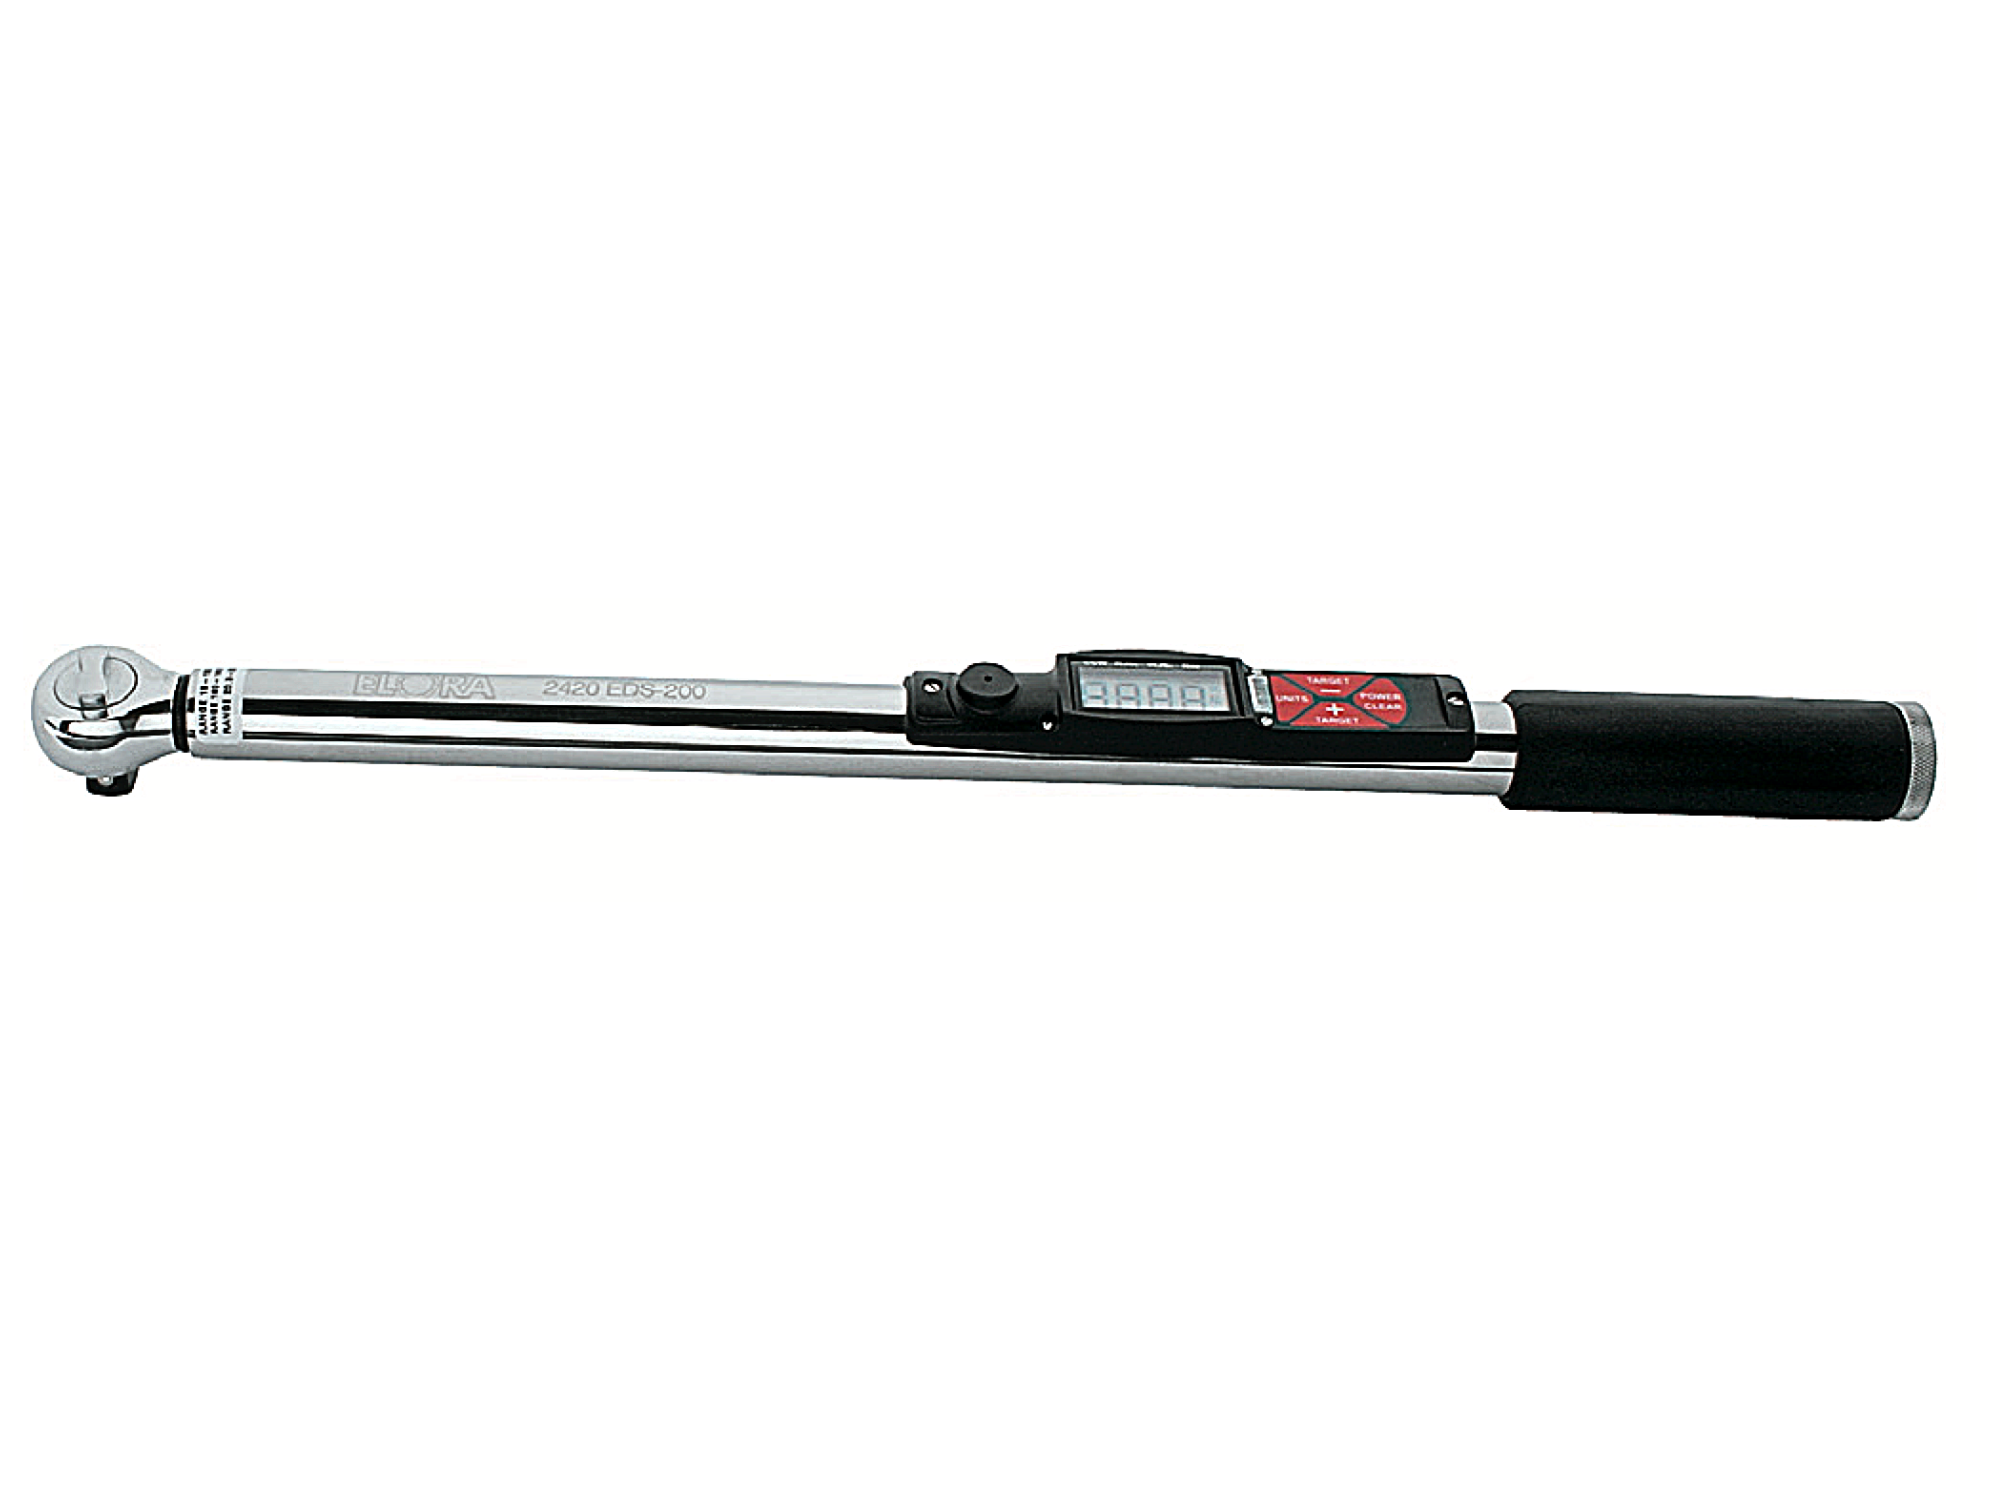 ELORA 2420 Elotronic 1/2" Torque Wrench (ELORA Tools) - Premium 1/2" Torque Wrench from ELORA - Shop now at Yew Aik.